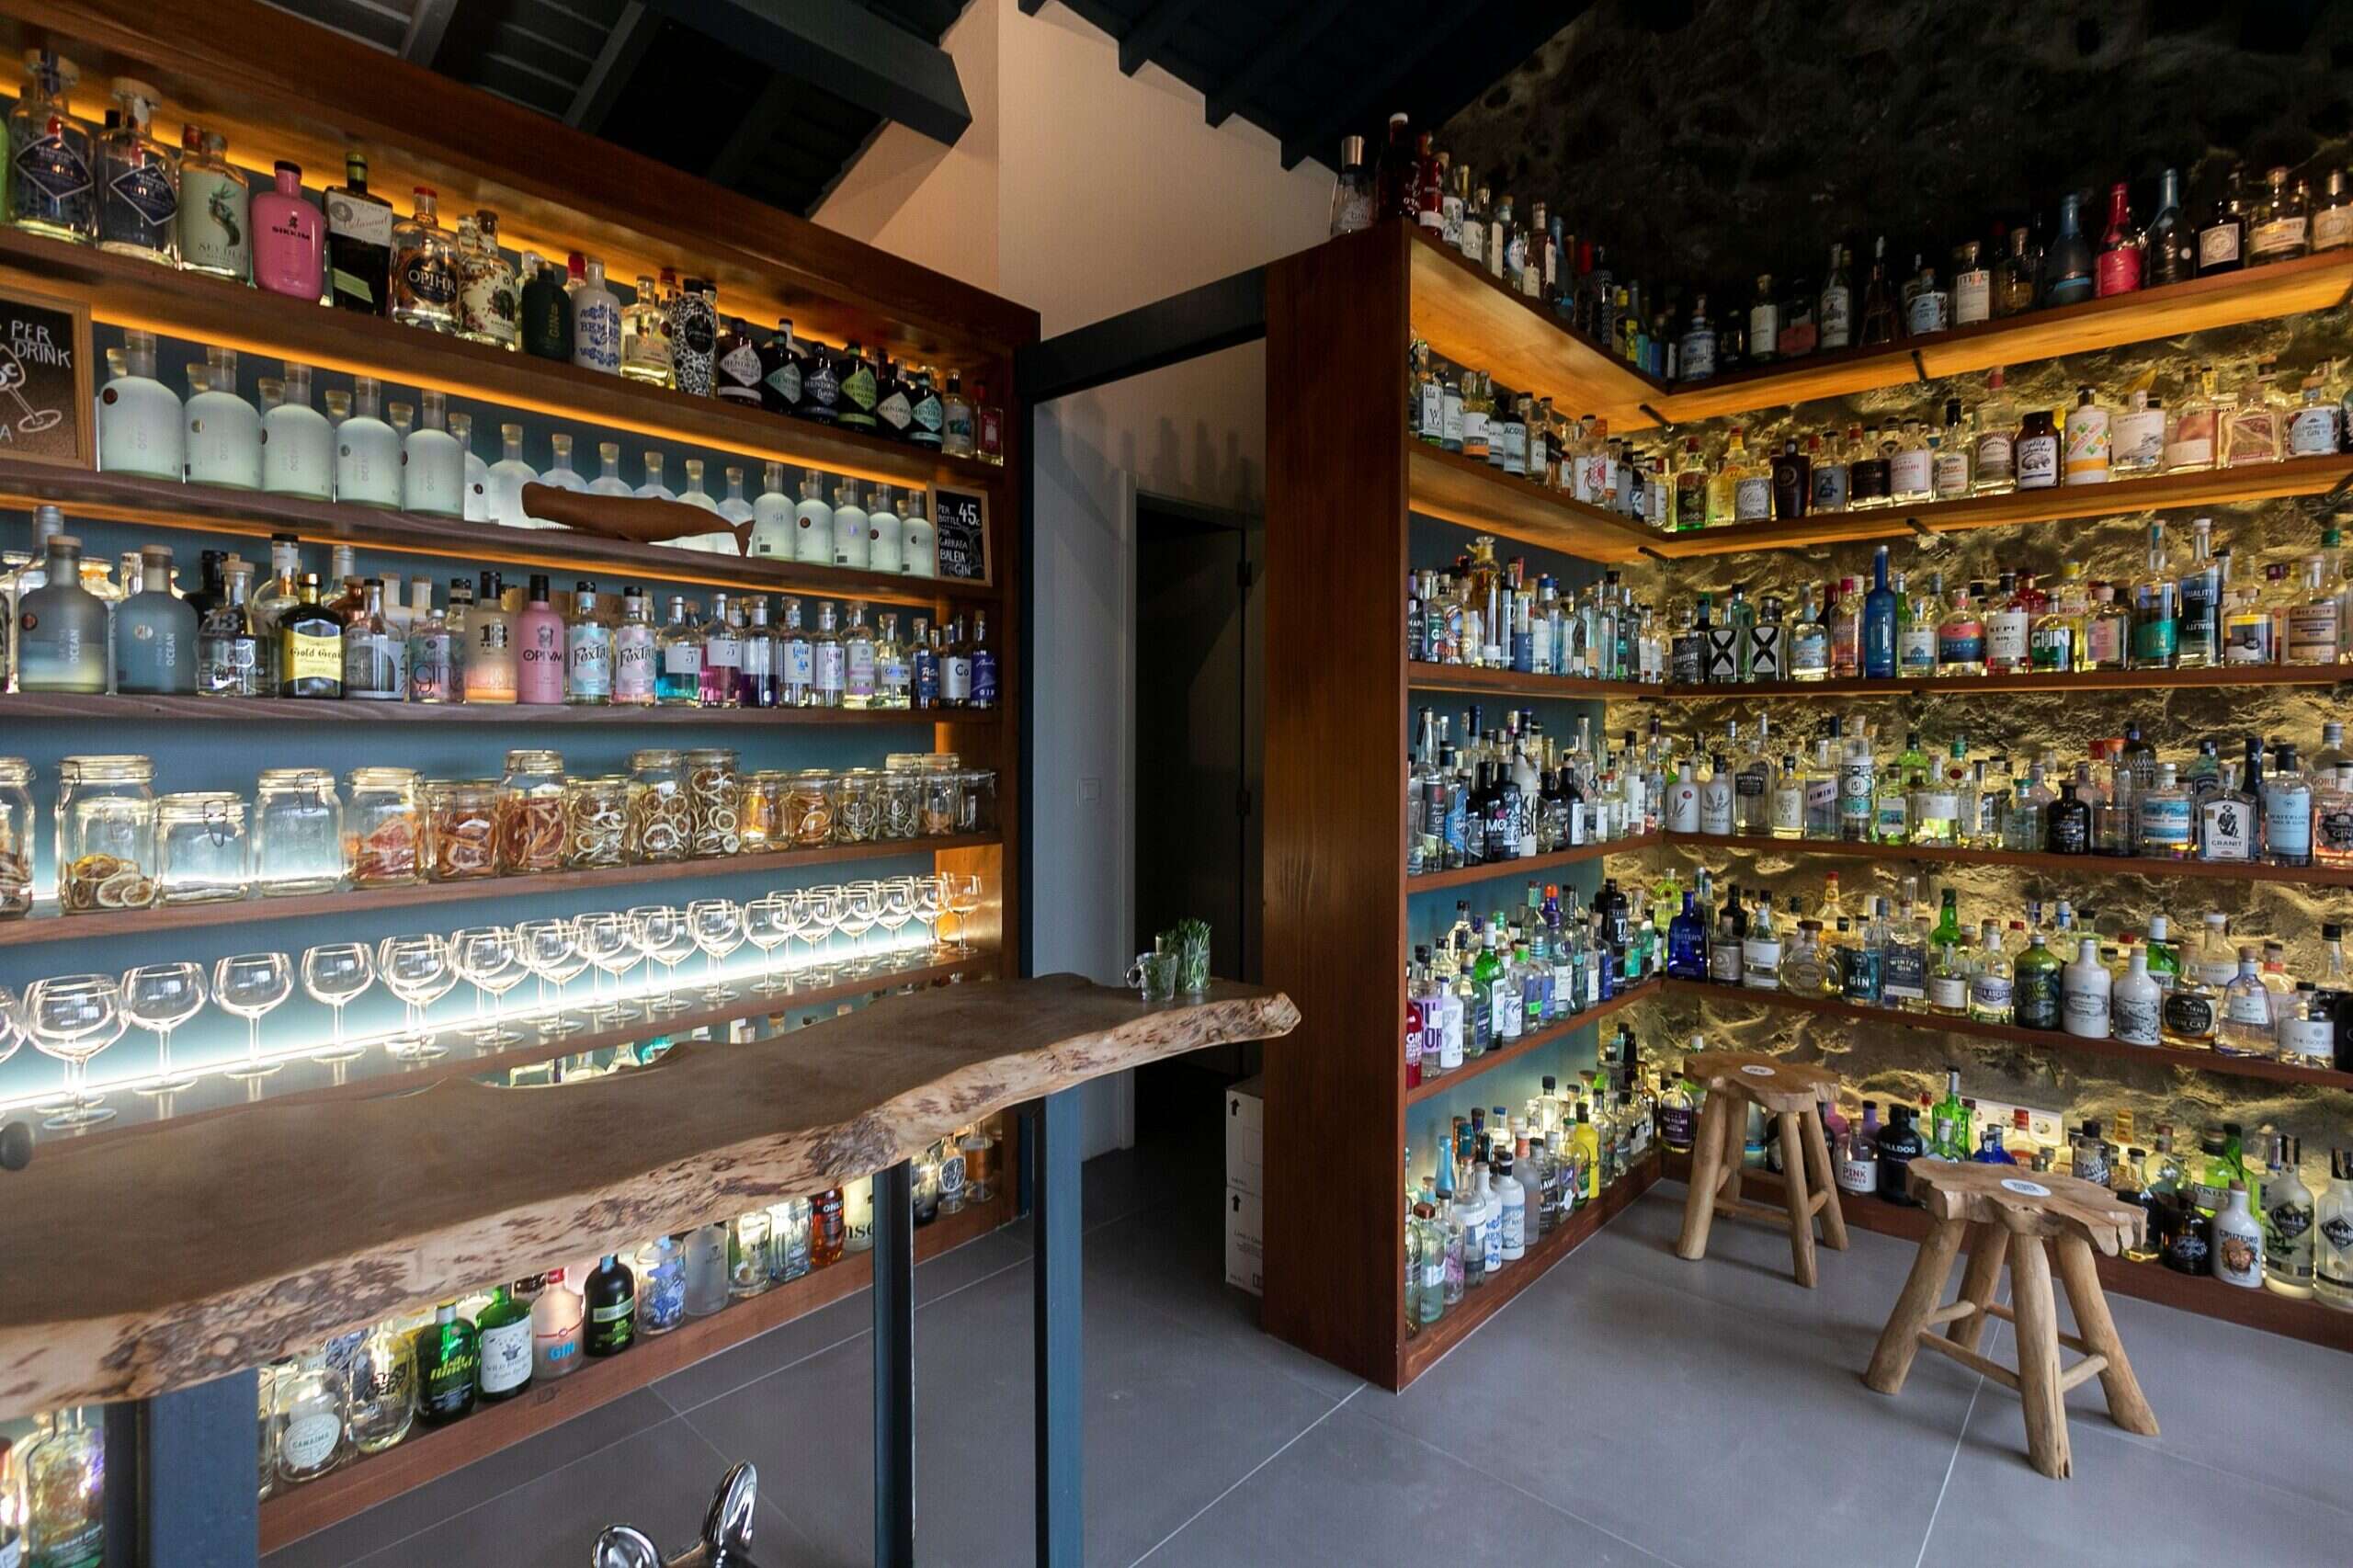 Azores hotel gin library